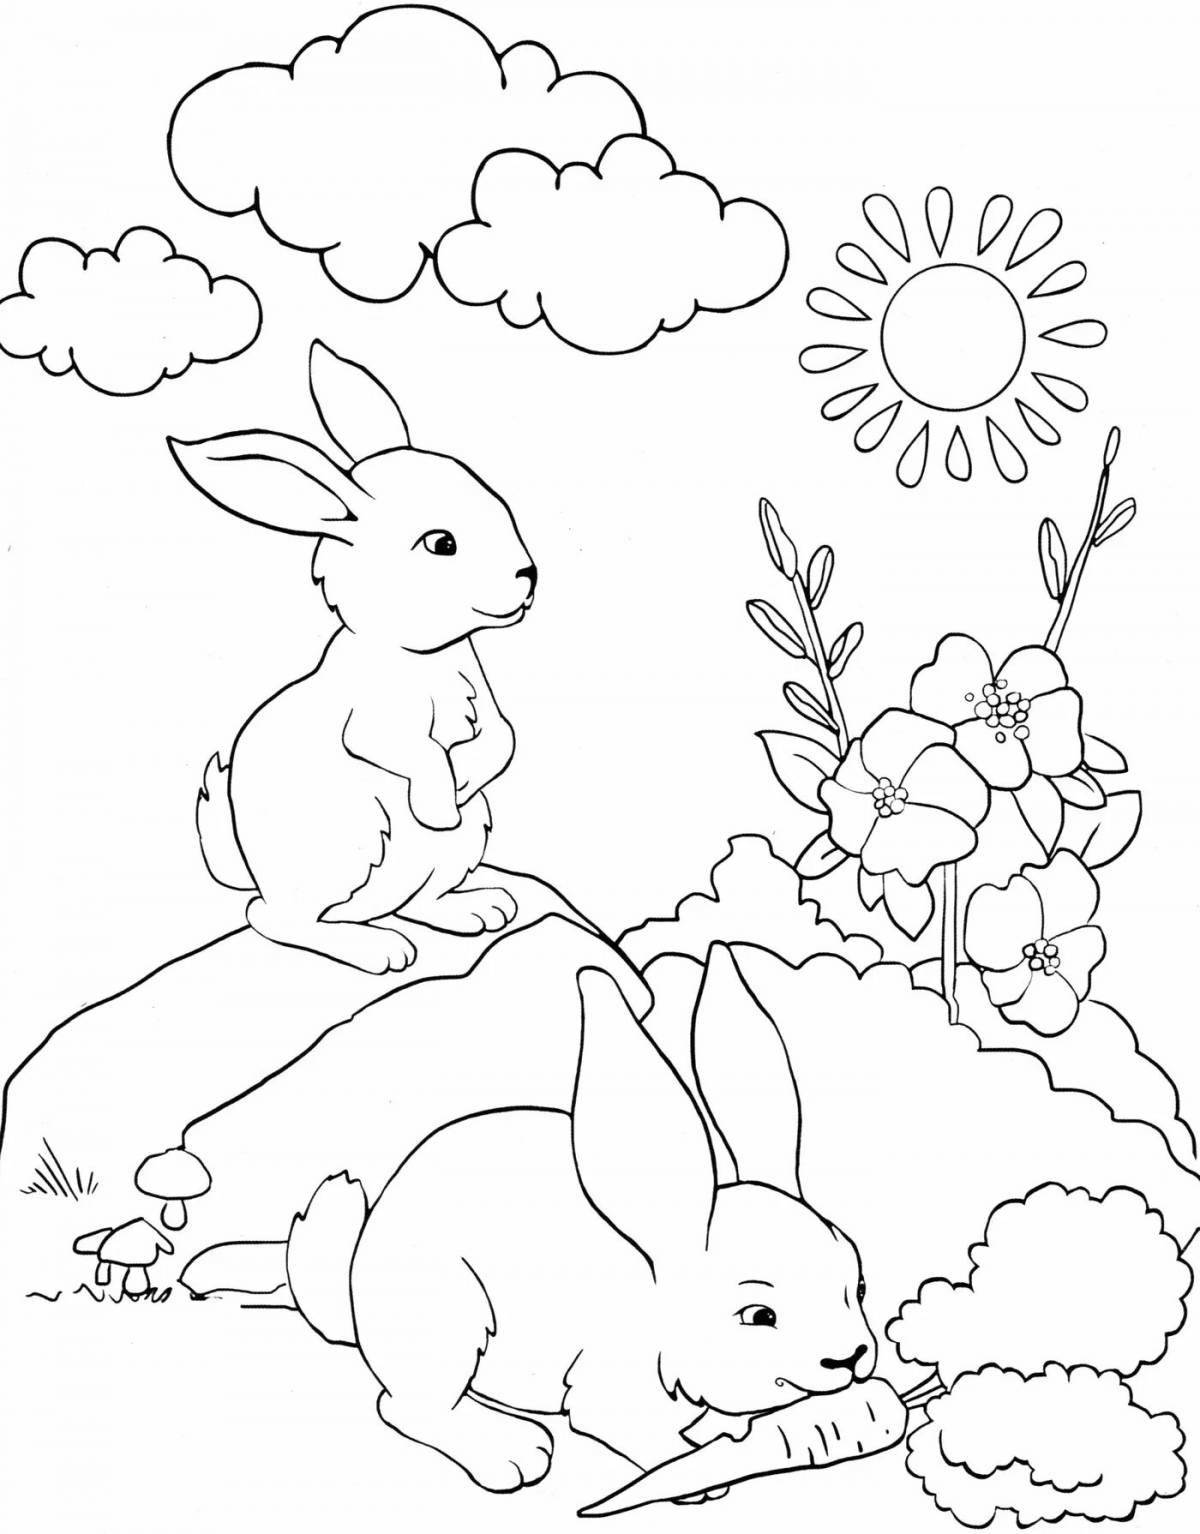 Funny Bunny Coloring Page for 6-7 year olds